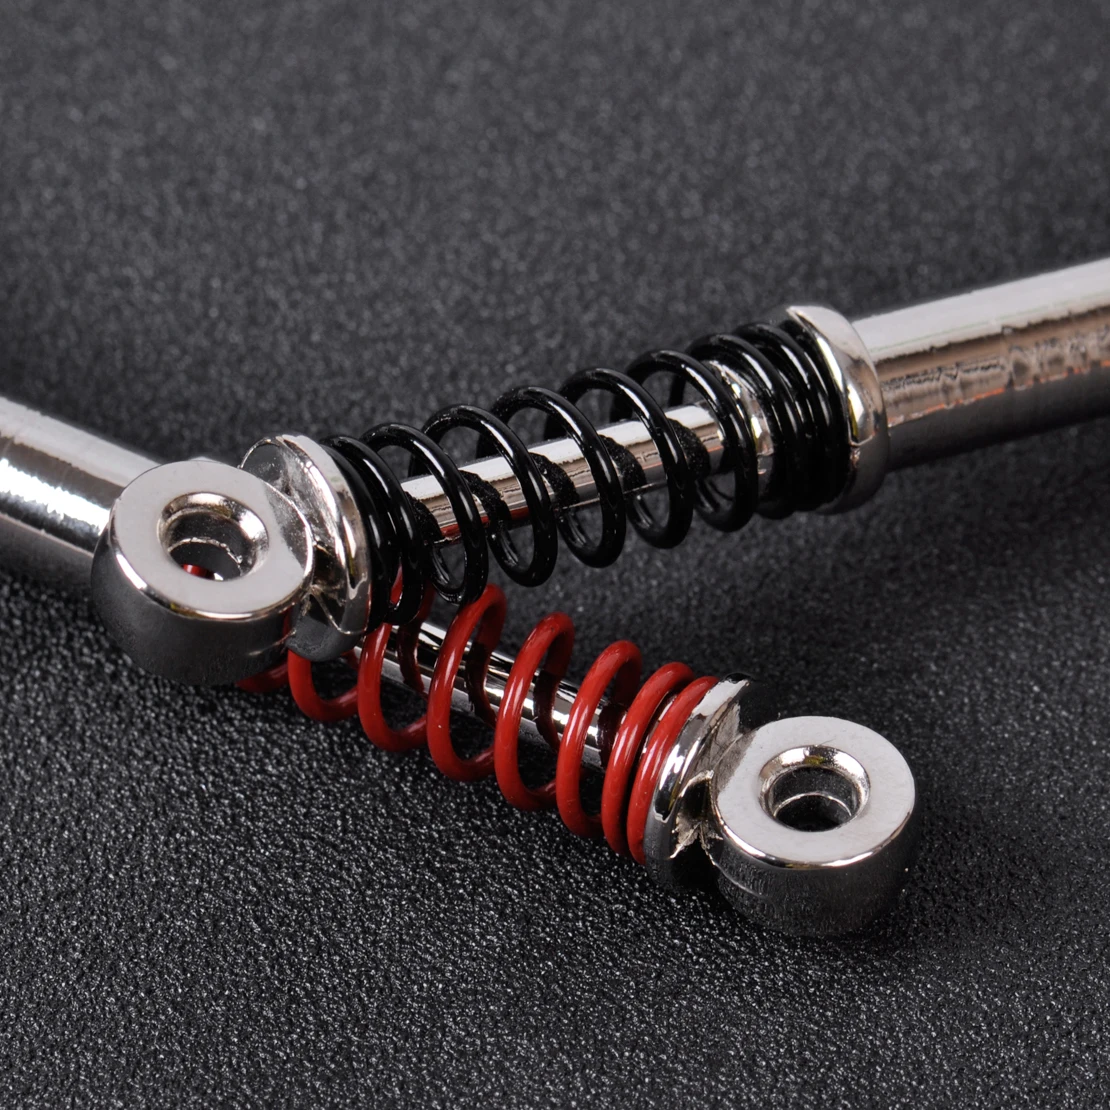 Suspension-Keychain-Key-Chains-Ring-Keyrings-Car-Auto-Coilover-Spring-Shock-Absorber-for-Mercedes-Audi-VW.jpg